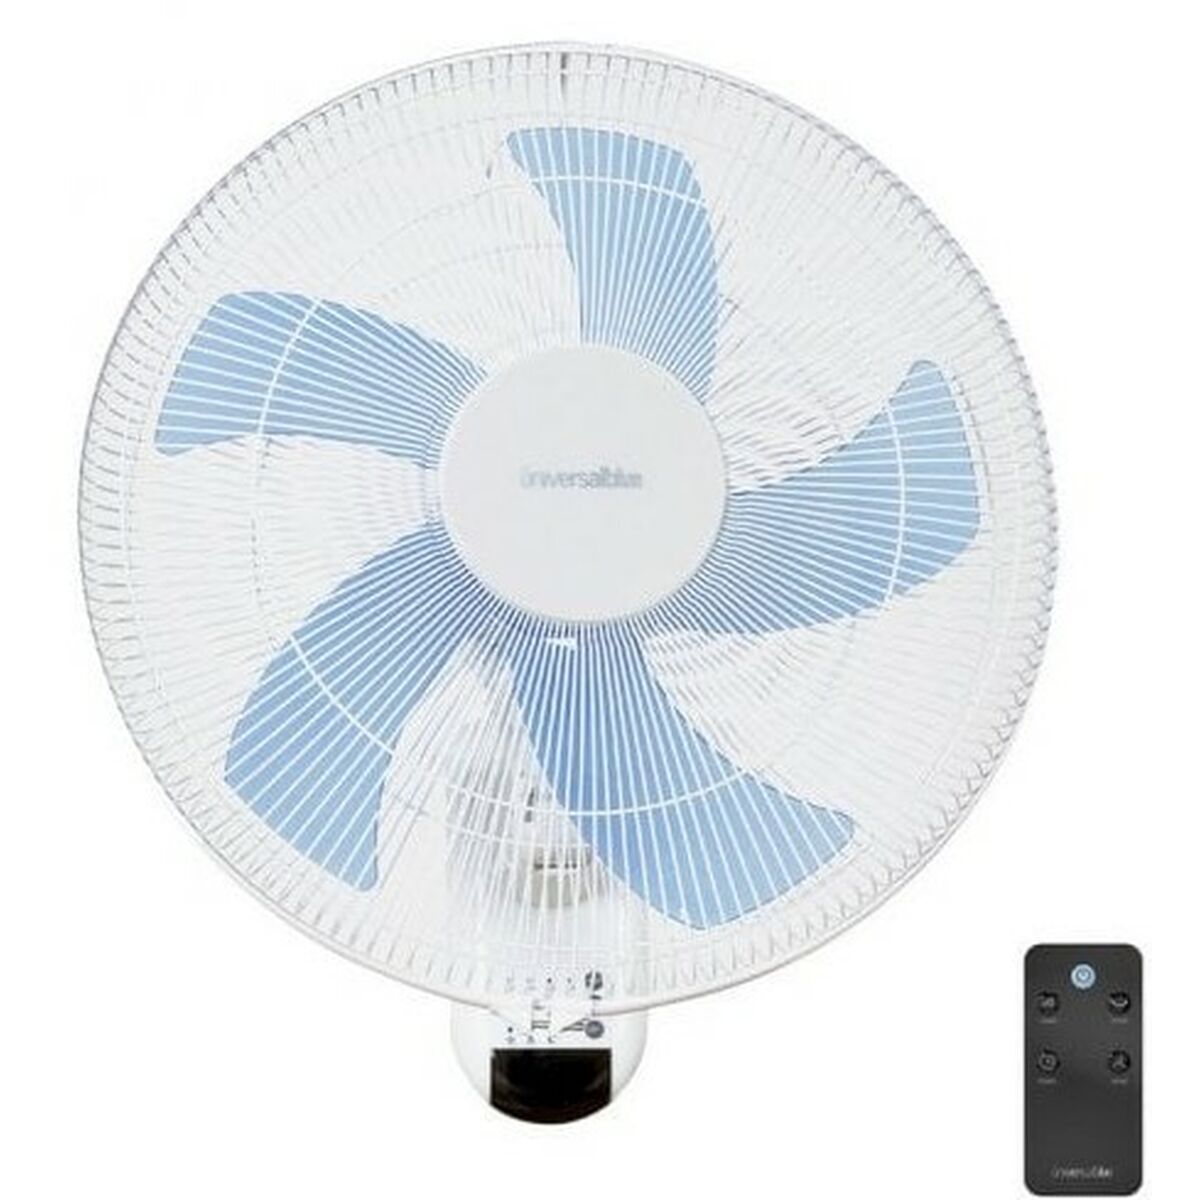 Fan Wall Universal Blue SOLDEN 50 W Ø 40 cm, Universal Blue, Home and cooking, Portable air conditioning, fan-wall-universal-blue-solden-50-w-o-40-cm, Brand_Universal Blue, category-reference-2399, category-reference-2450, category-reference-2451, category-reference-t-19656, category-reference-t-21087, category-reference-t-25217, category-reference-t-29132, Condition_NEW, ferretería, Price_50 - 100, summer, RiotNook